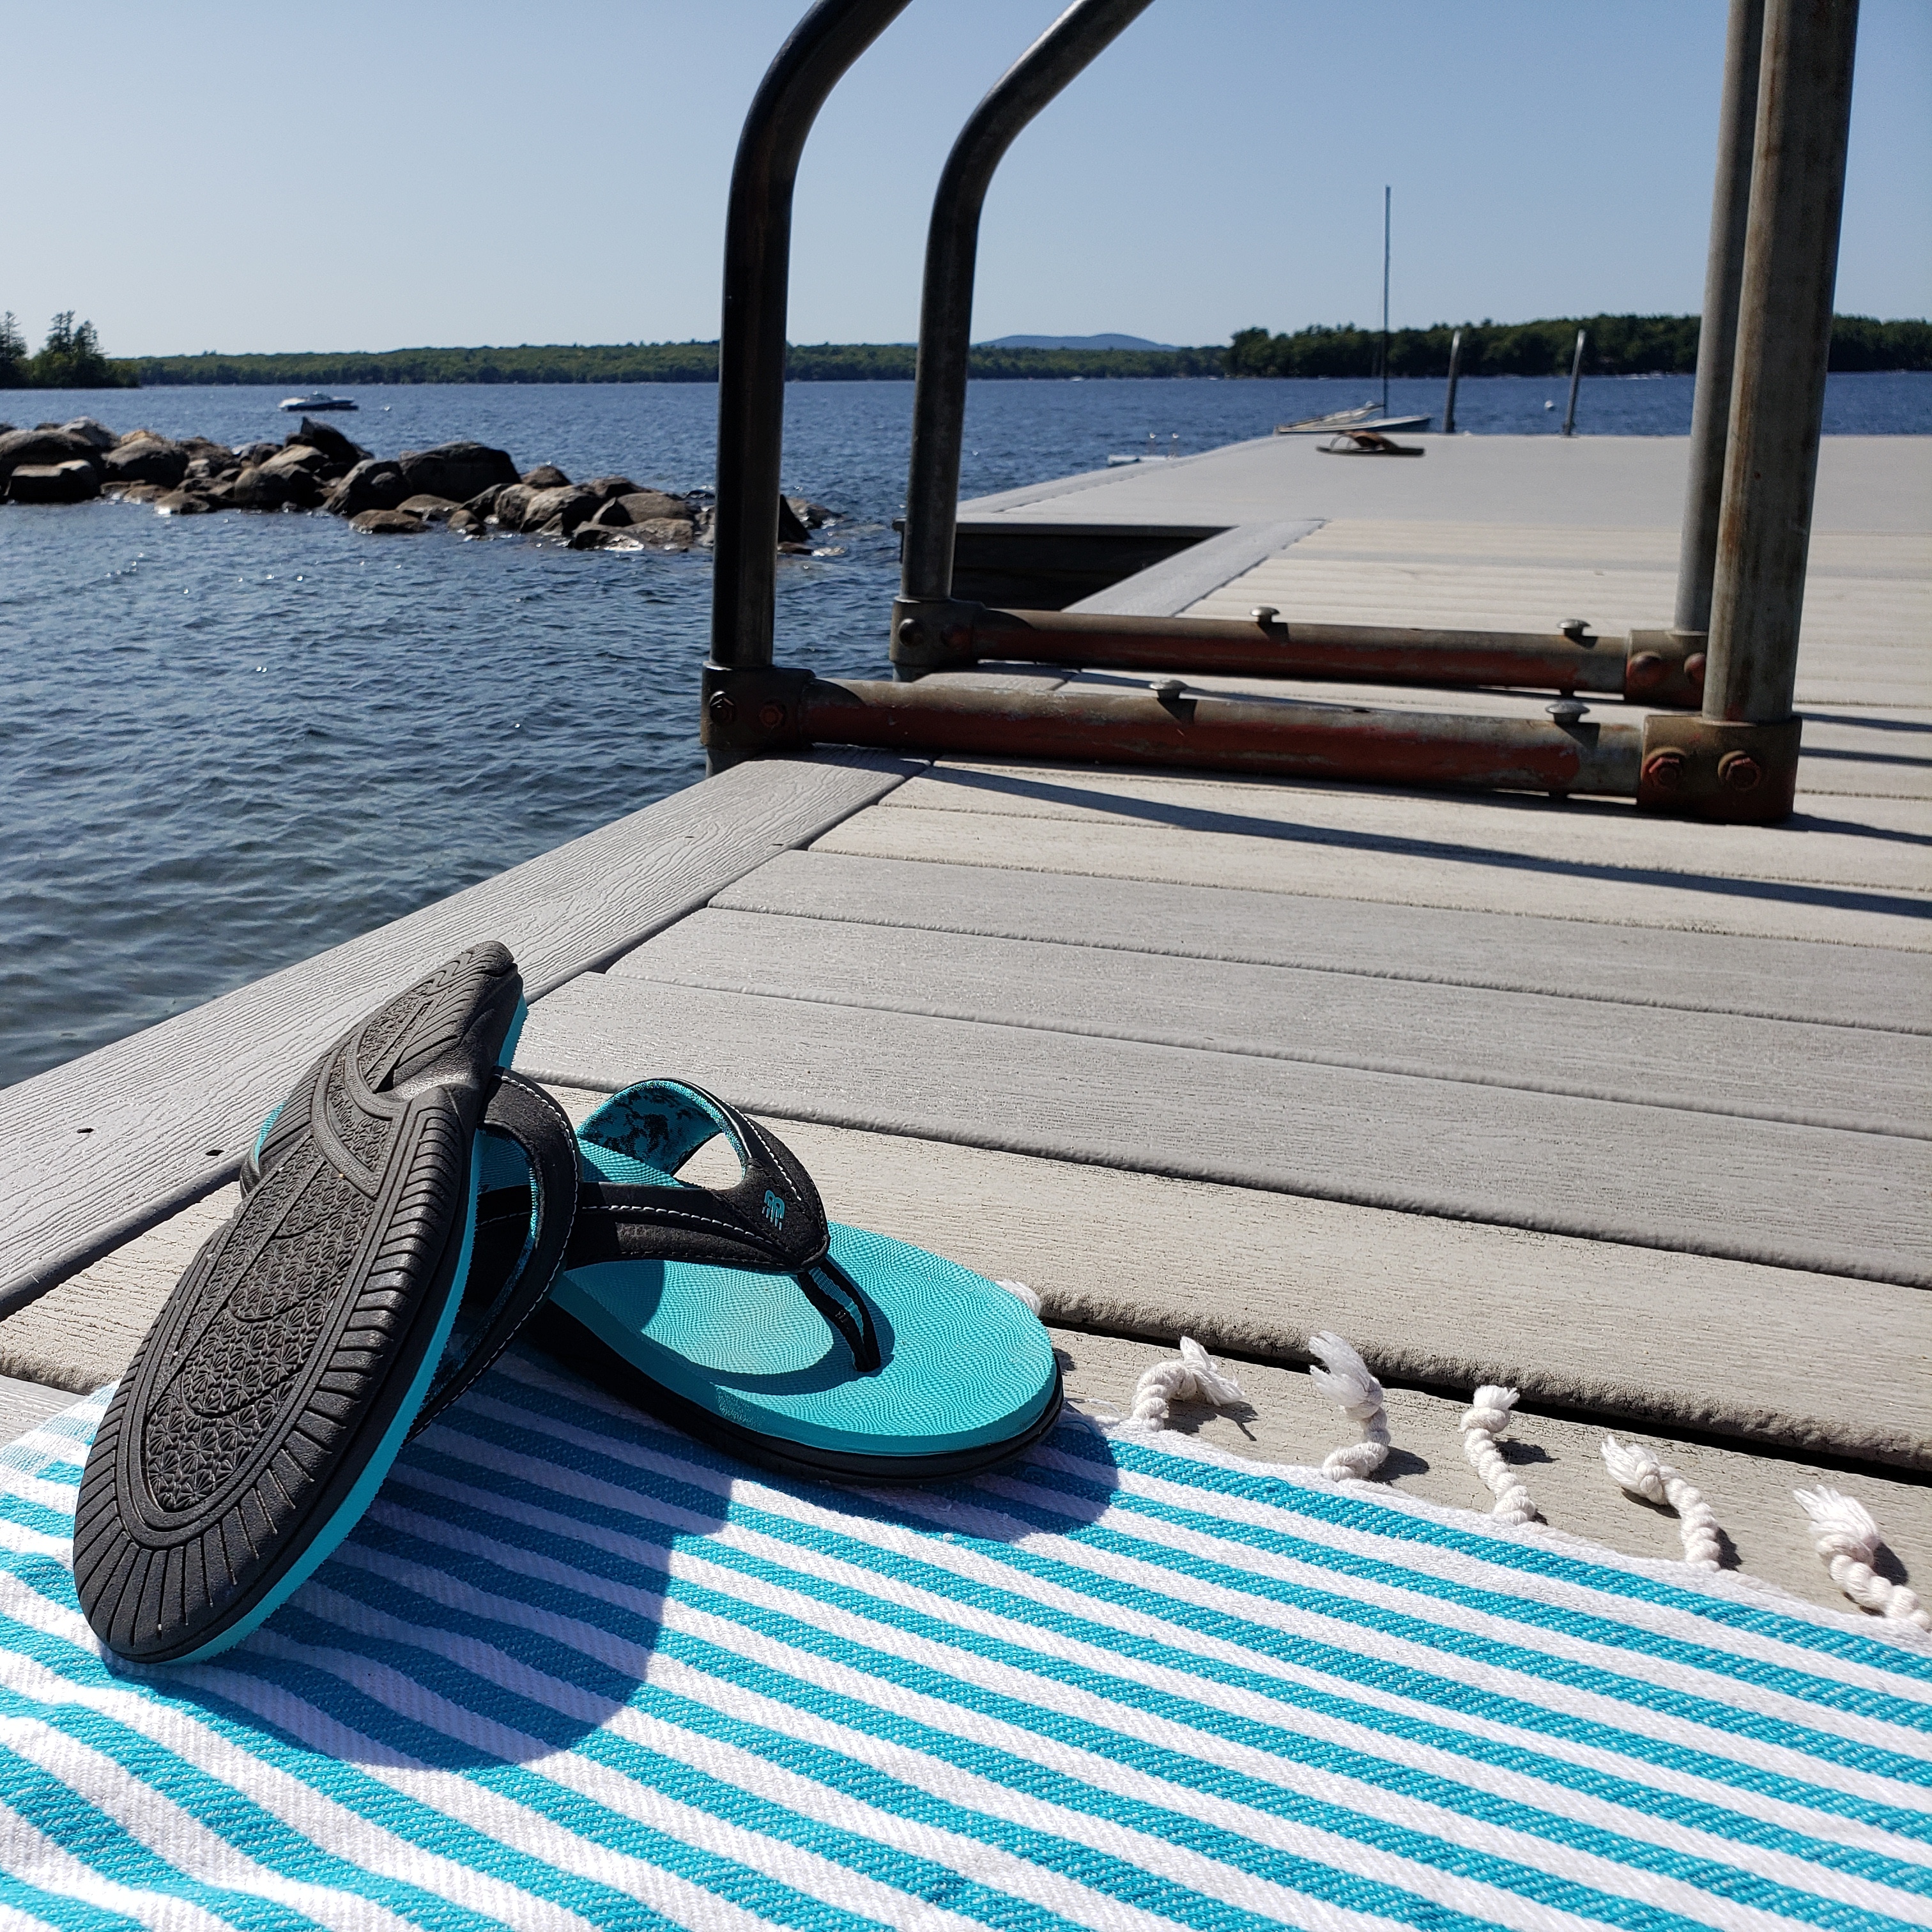 some sandals on a dock in maine, by a lake